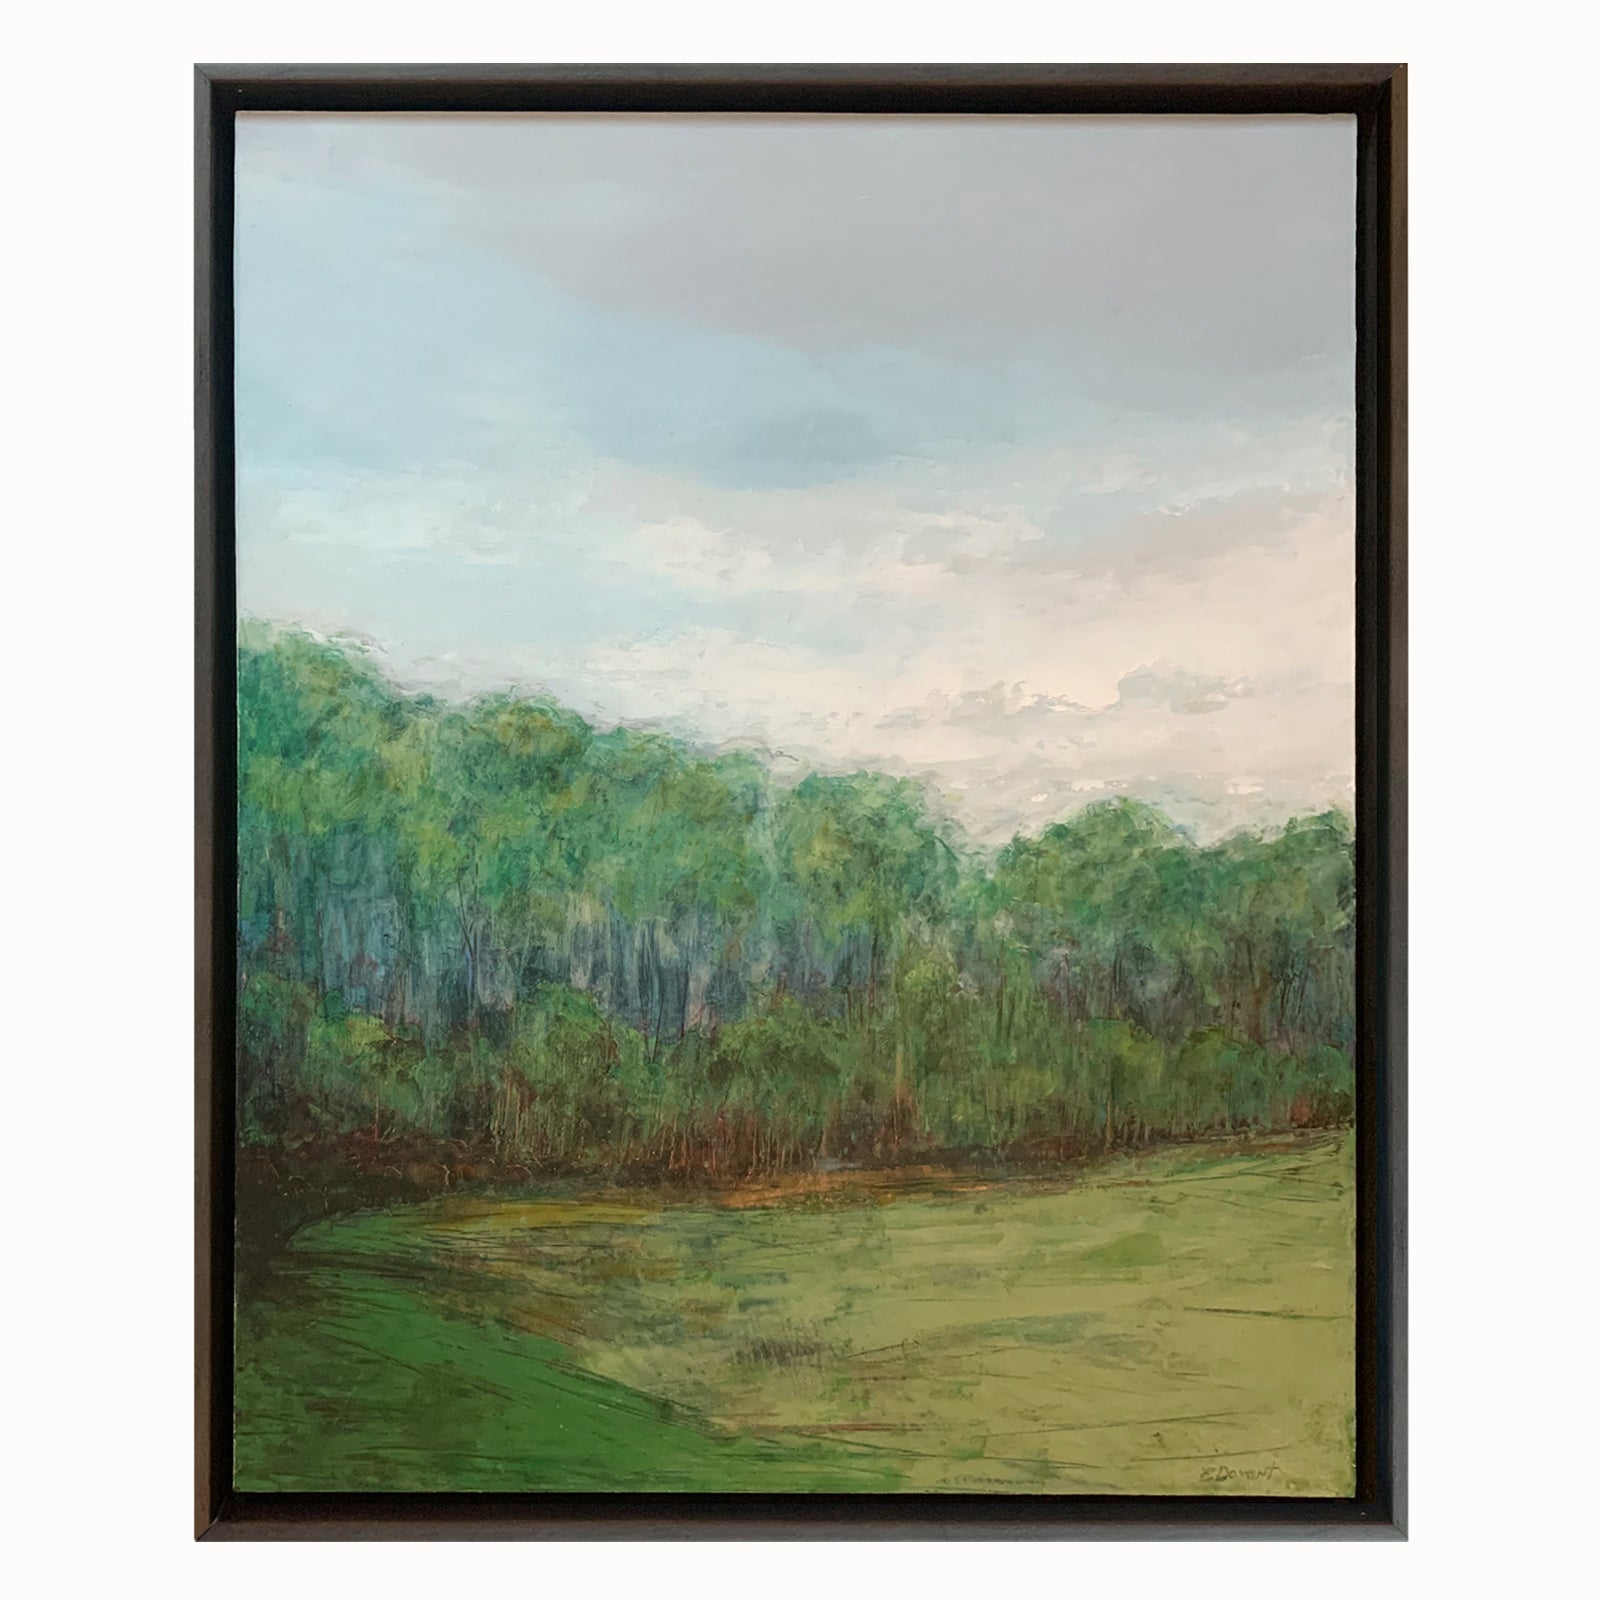 Elizabeth Davant oil and cold wax paintings inspired by nature, at Lark & Key art gallery, Charlotte NC. Online shopping and locally by appointment.